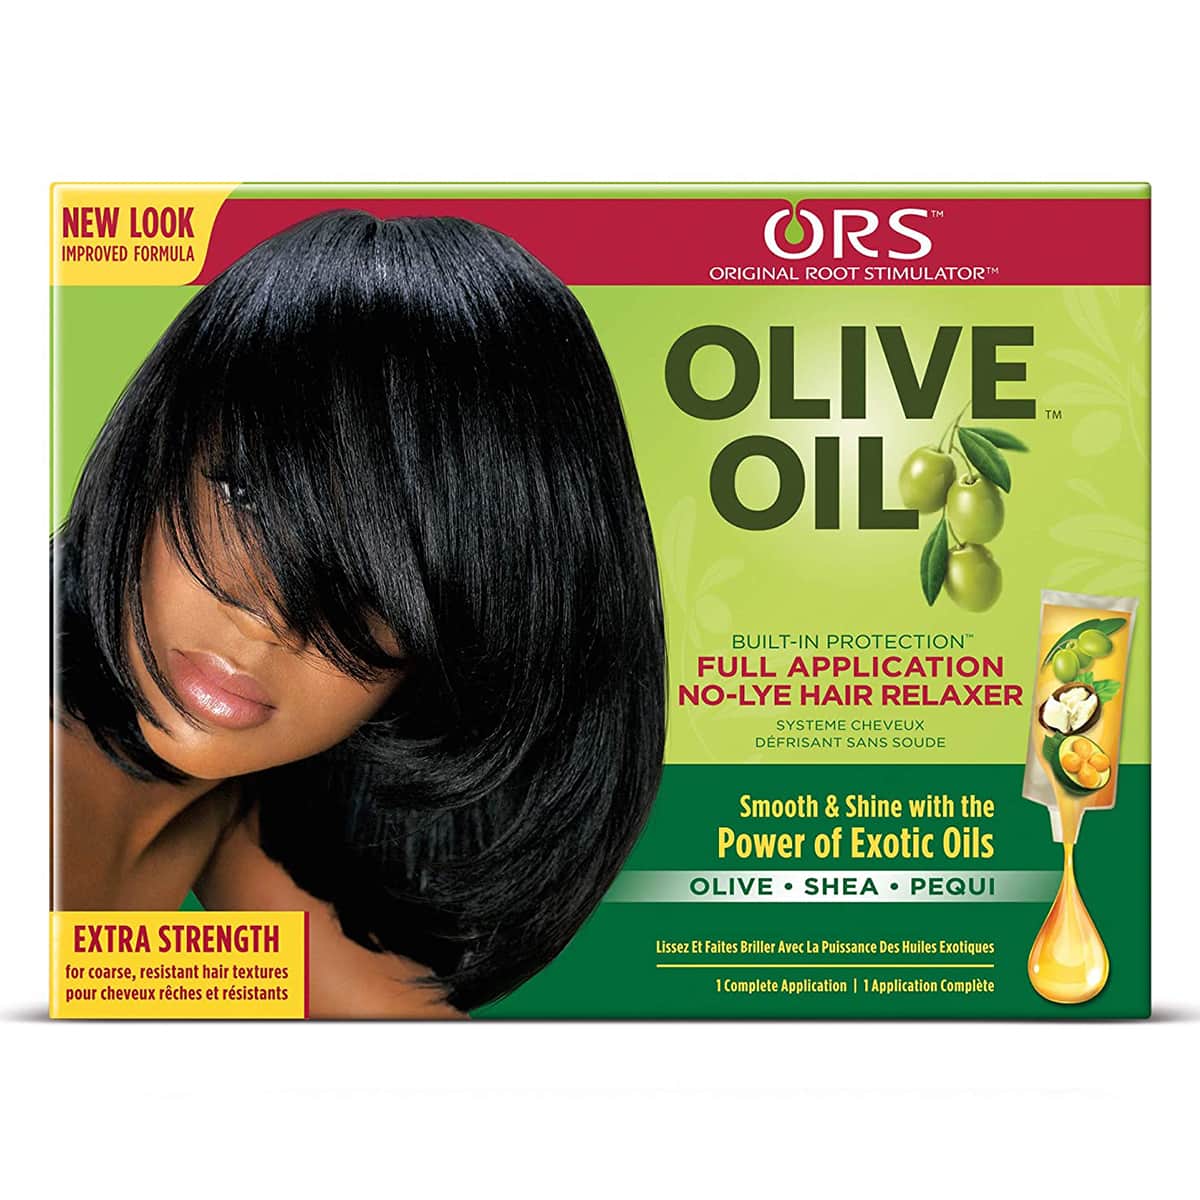 Buy Organic Root Stimulator (ORS) Olive Oil No-lye Hair Relaxer System Kit (Extra Strength)